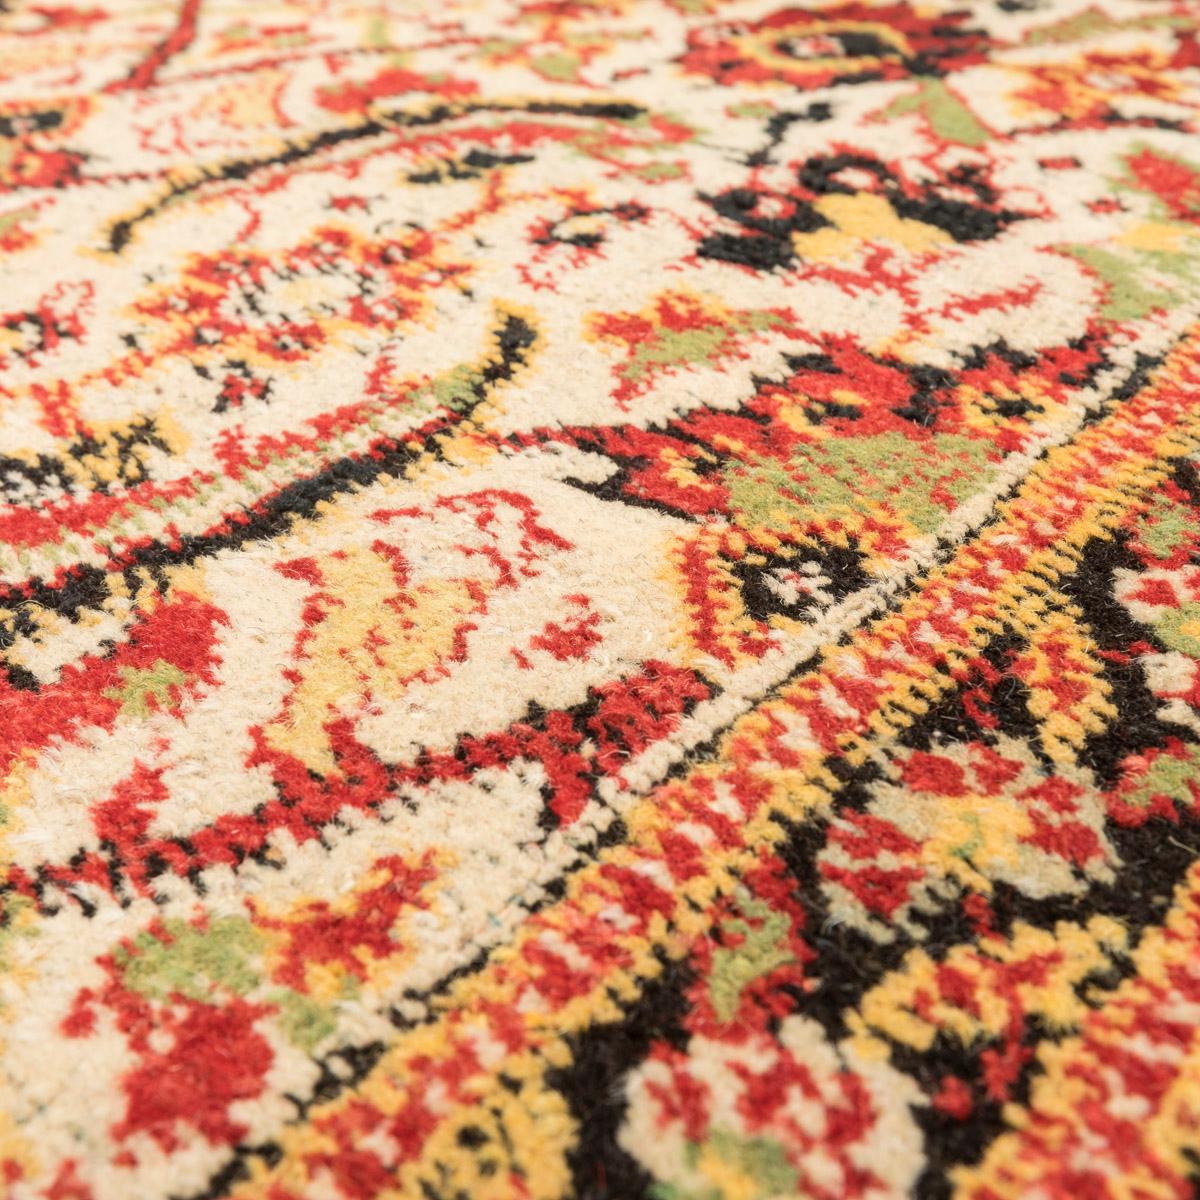 Wool XIX Century, Agra Rug in Reds and Yellows on a Beige Background. For Sale